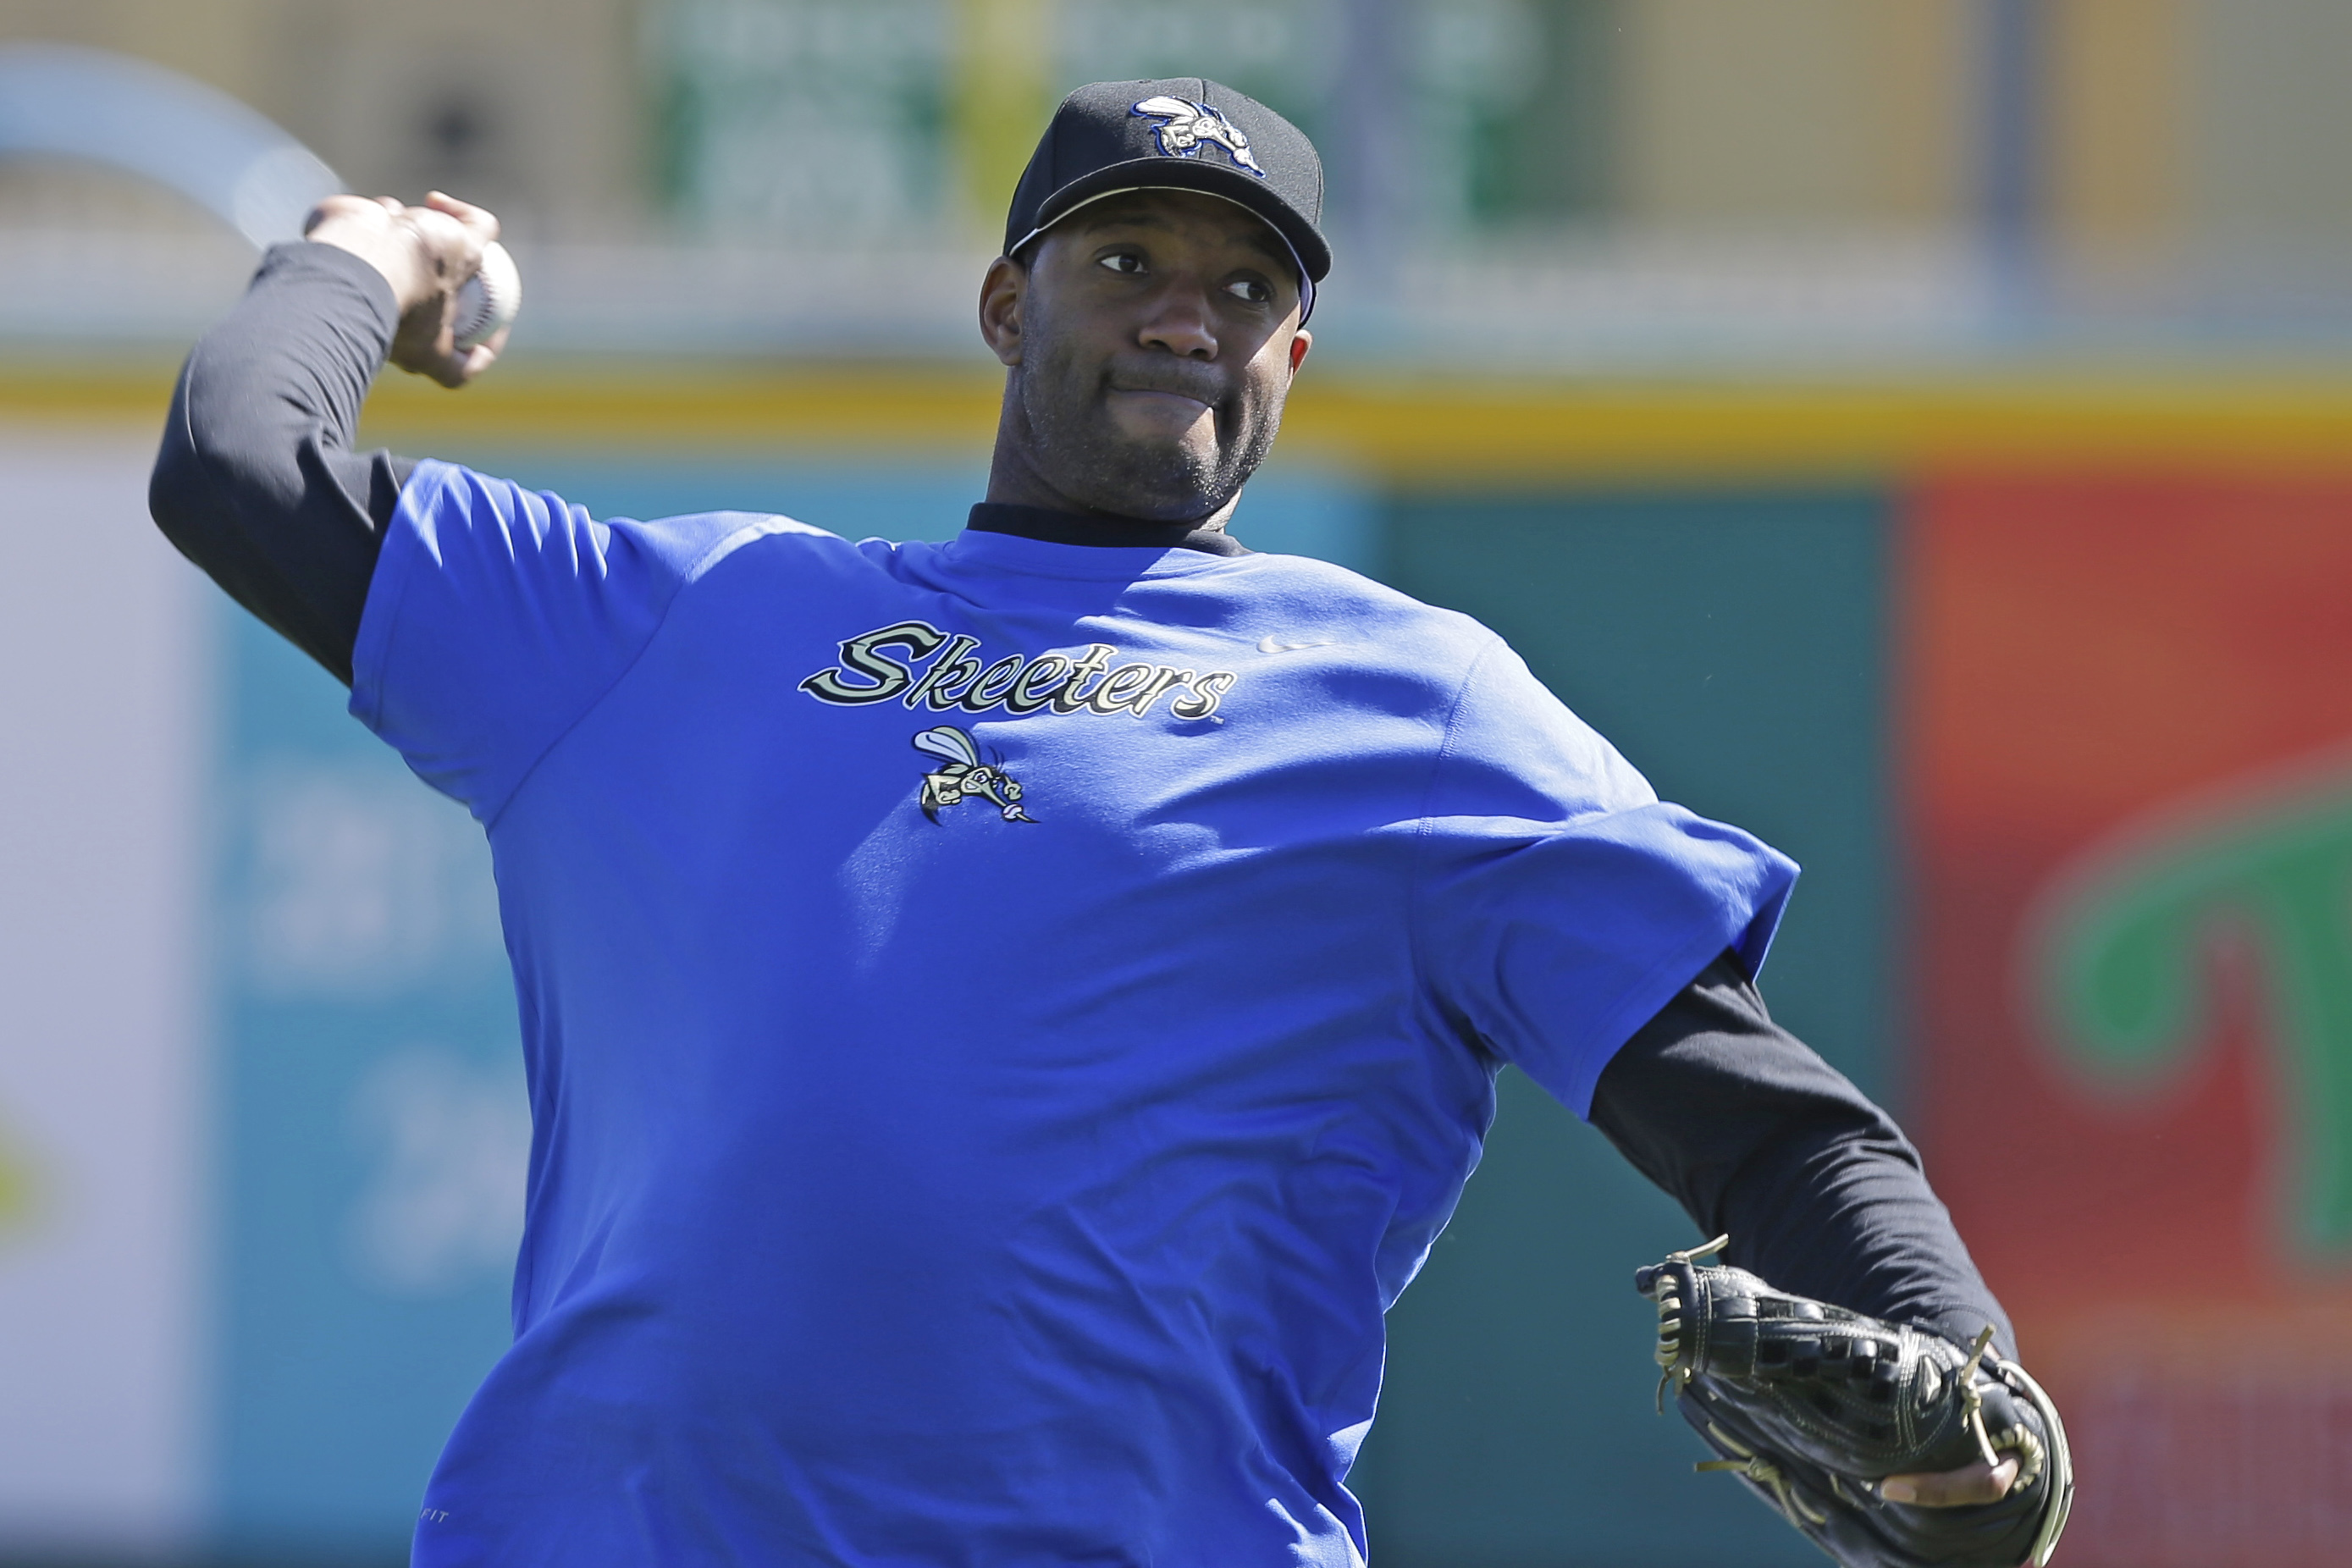 Ex-NBA star Tracy McGrady to pitch for Sugar Land Skeeters